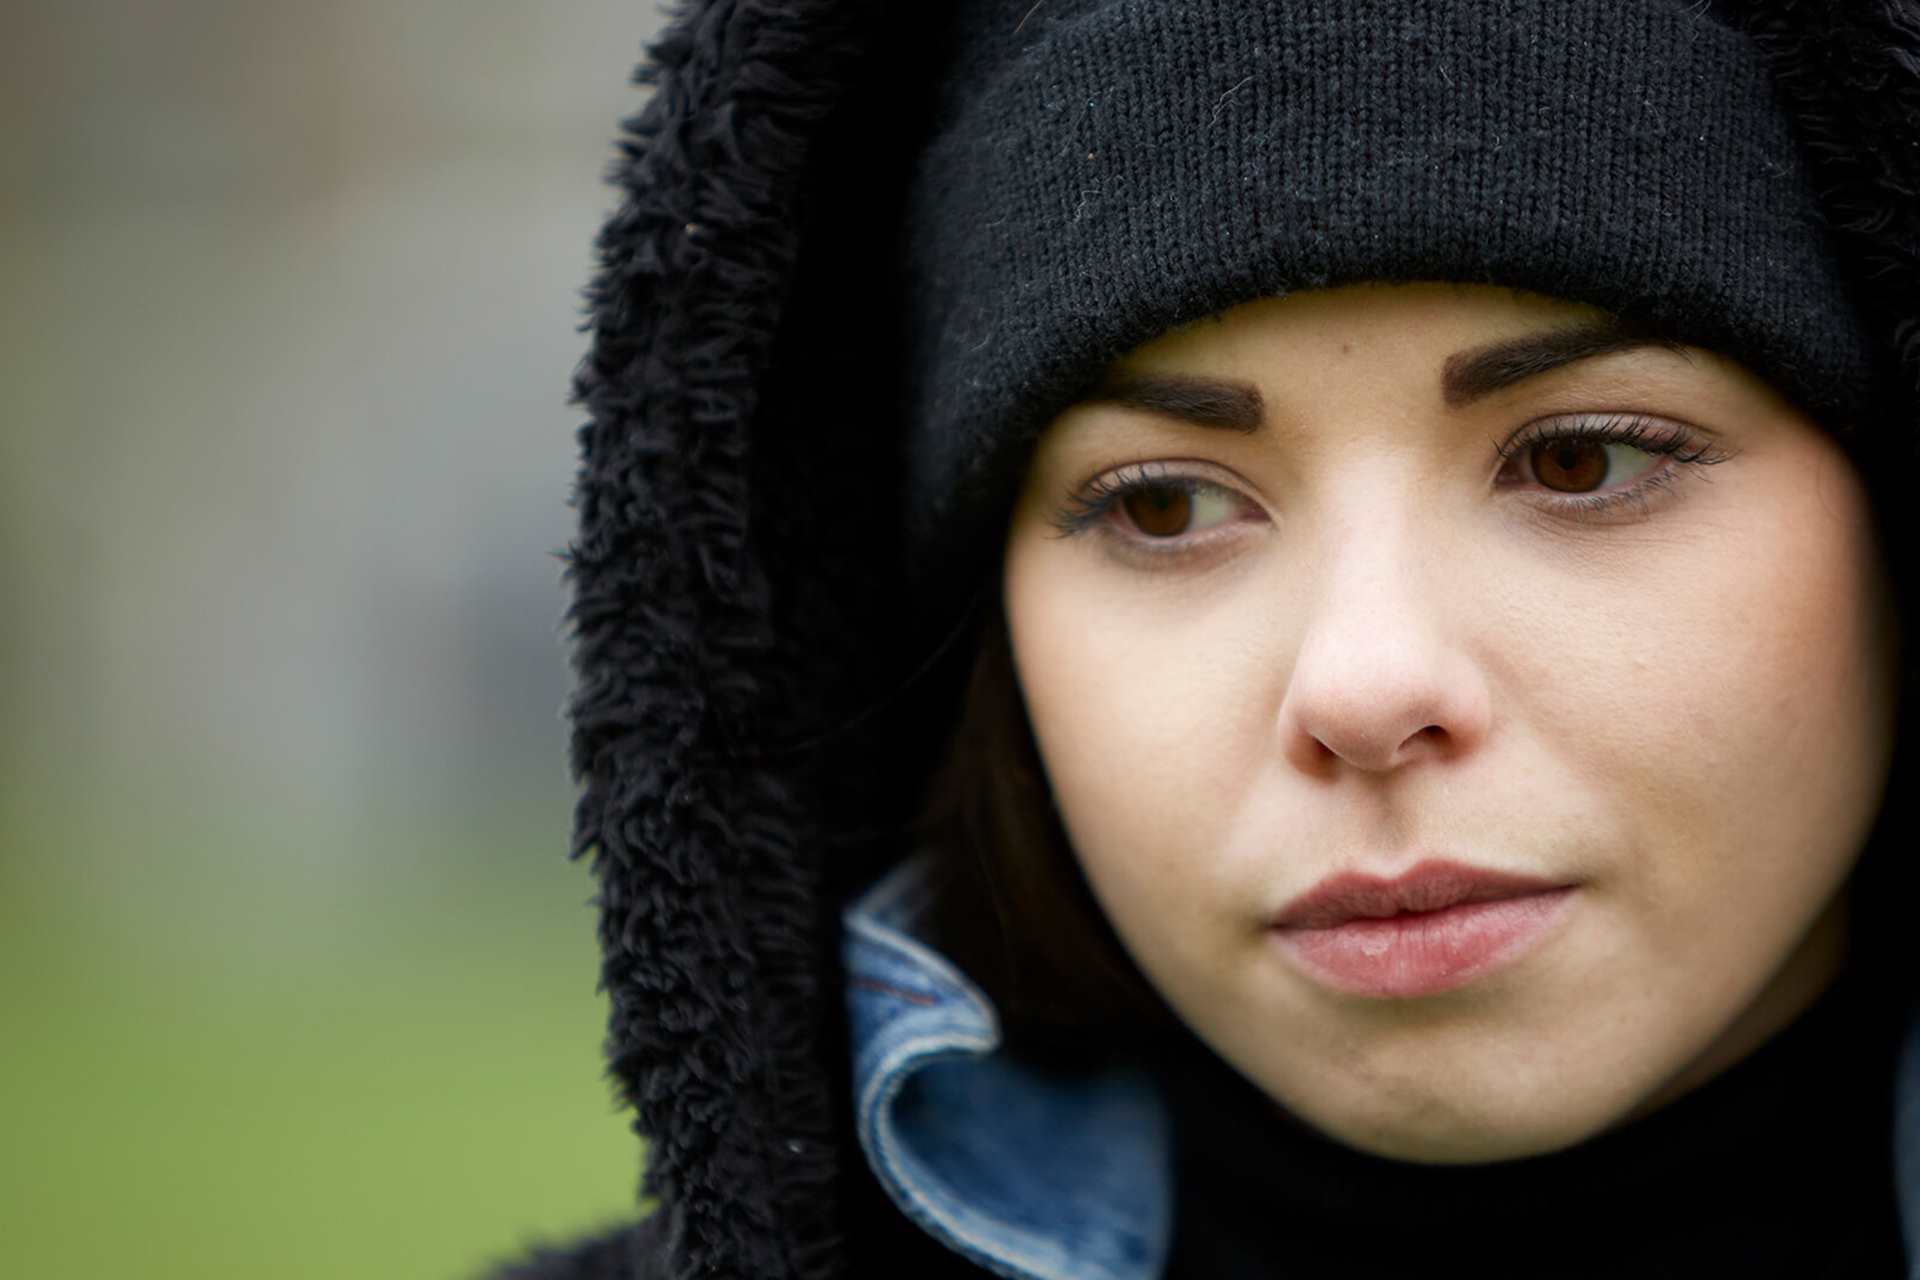 close-up-of-a-girl-wearing-black-beanie-looking-worried-with-eyes-looking-down